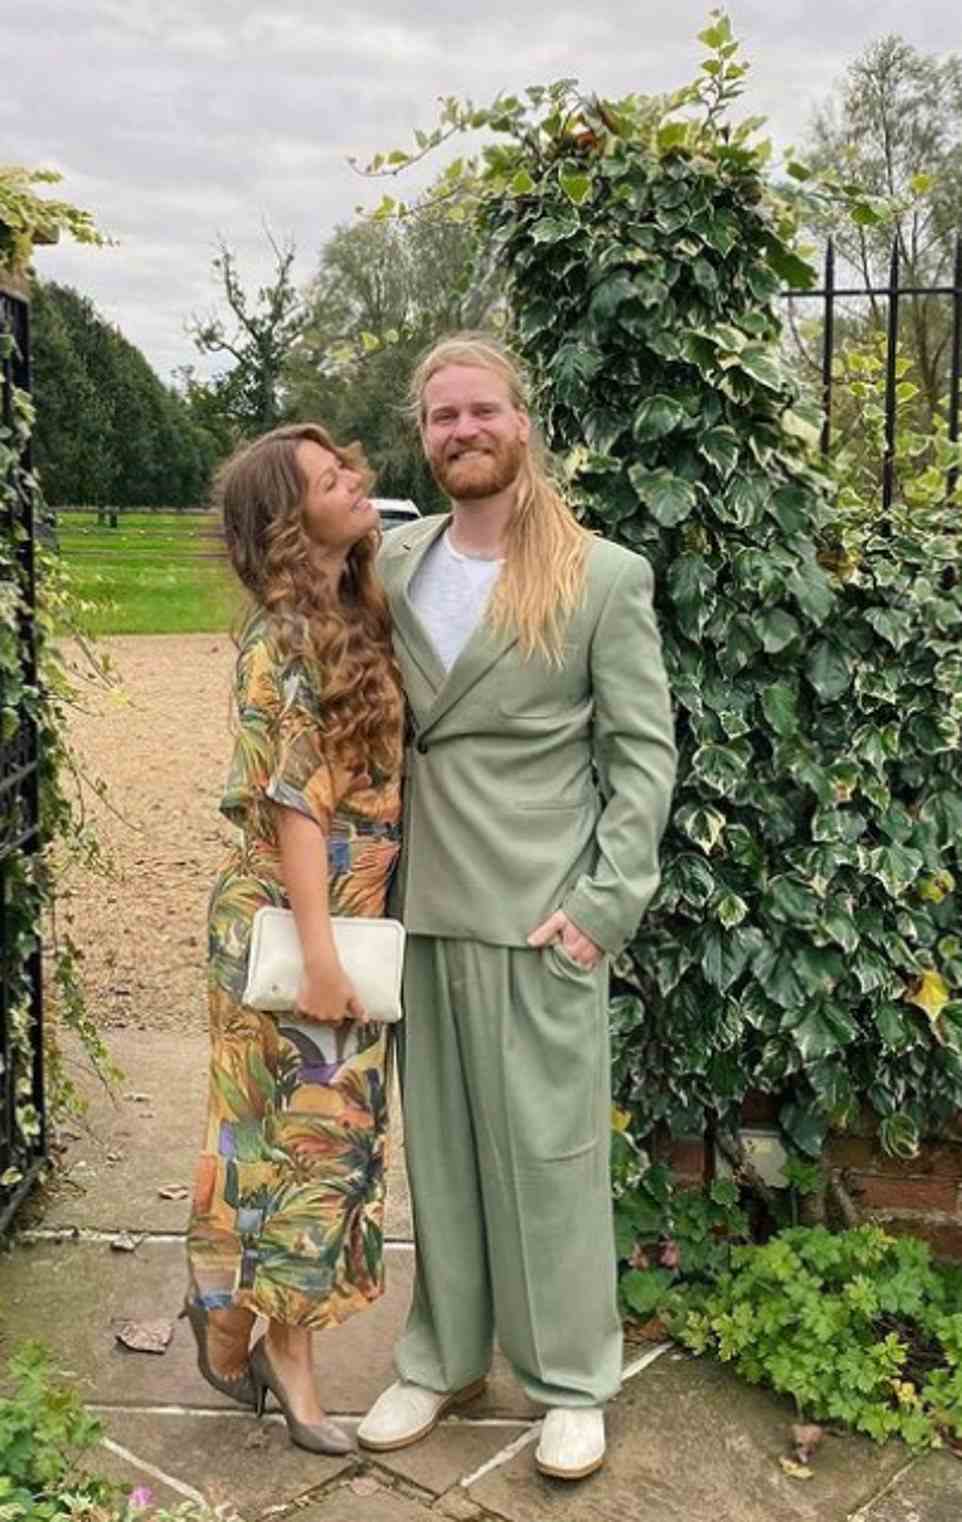 Sam's girlfriend Miss Gaskin-Barber, pictured posing with longterm boyfriend Sam, sells the jewellery she makes online under the brand name Lone Wolves Creative